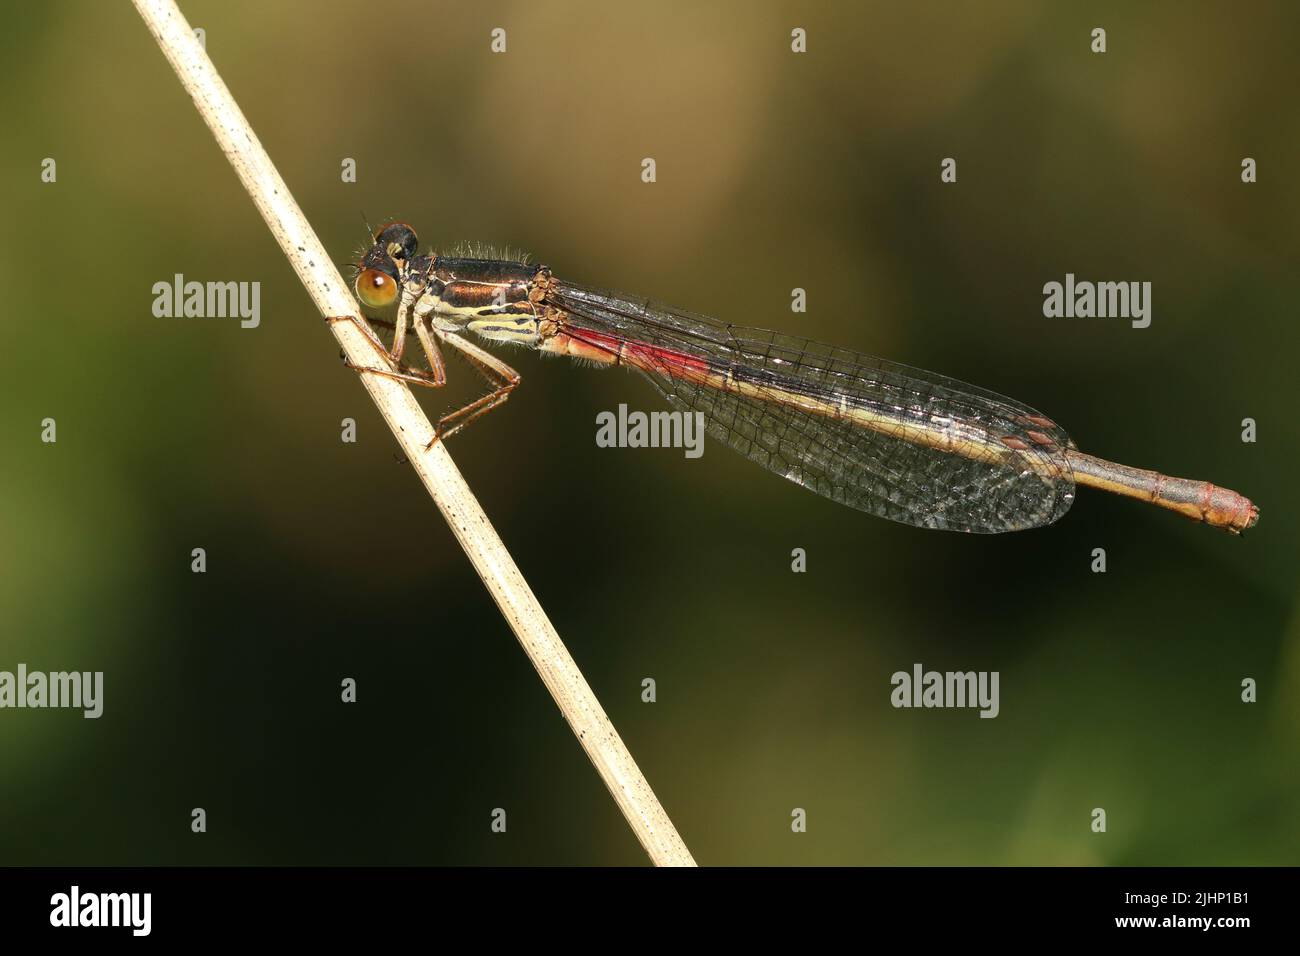 A Small Red Damselfly, Ceriagrion tenellum, resting on a blade of grass. Stock Photo